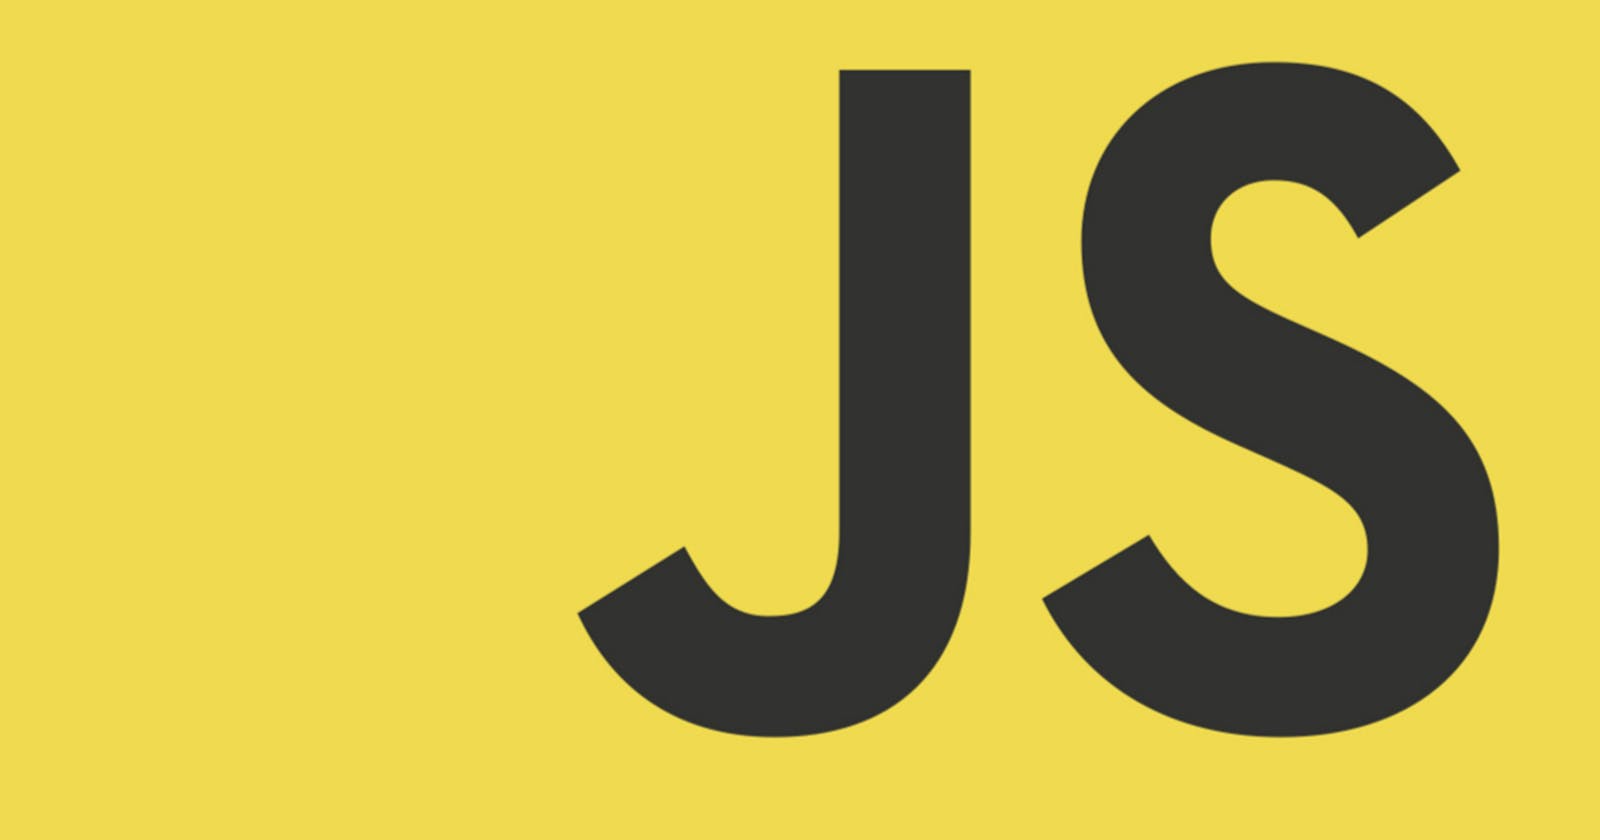 More about Variables and Variable Hoisting in JavaScript